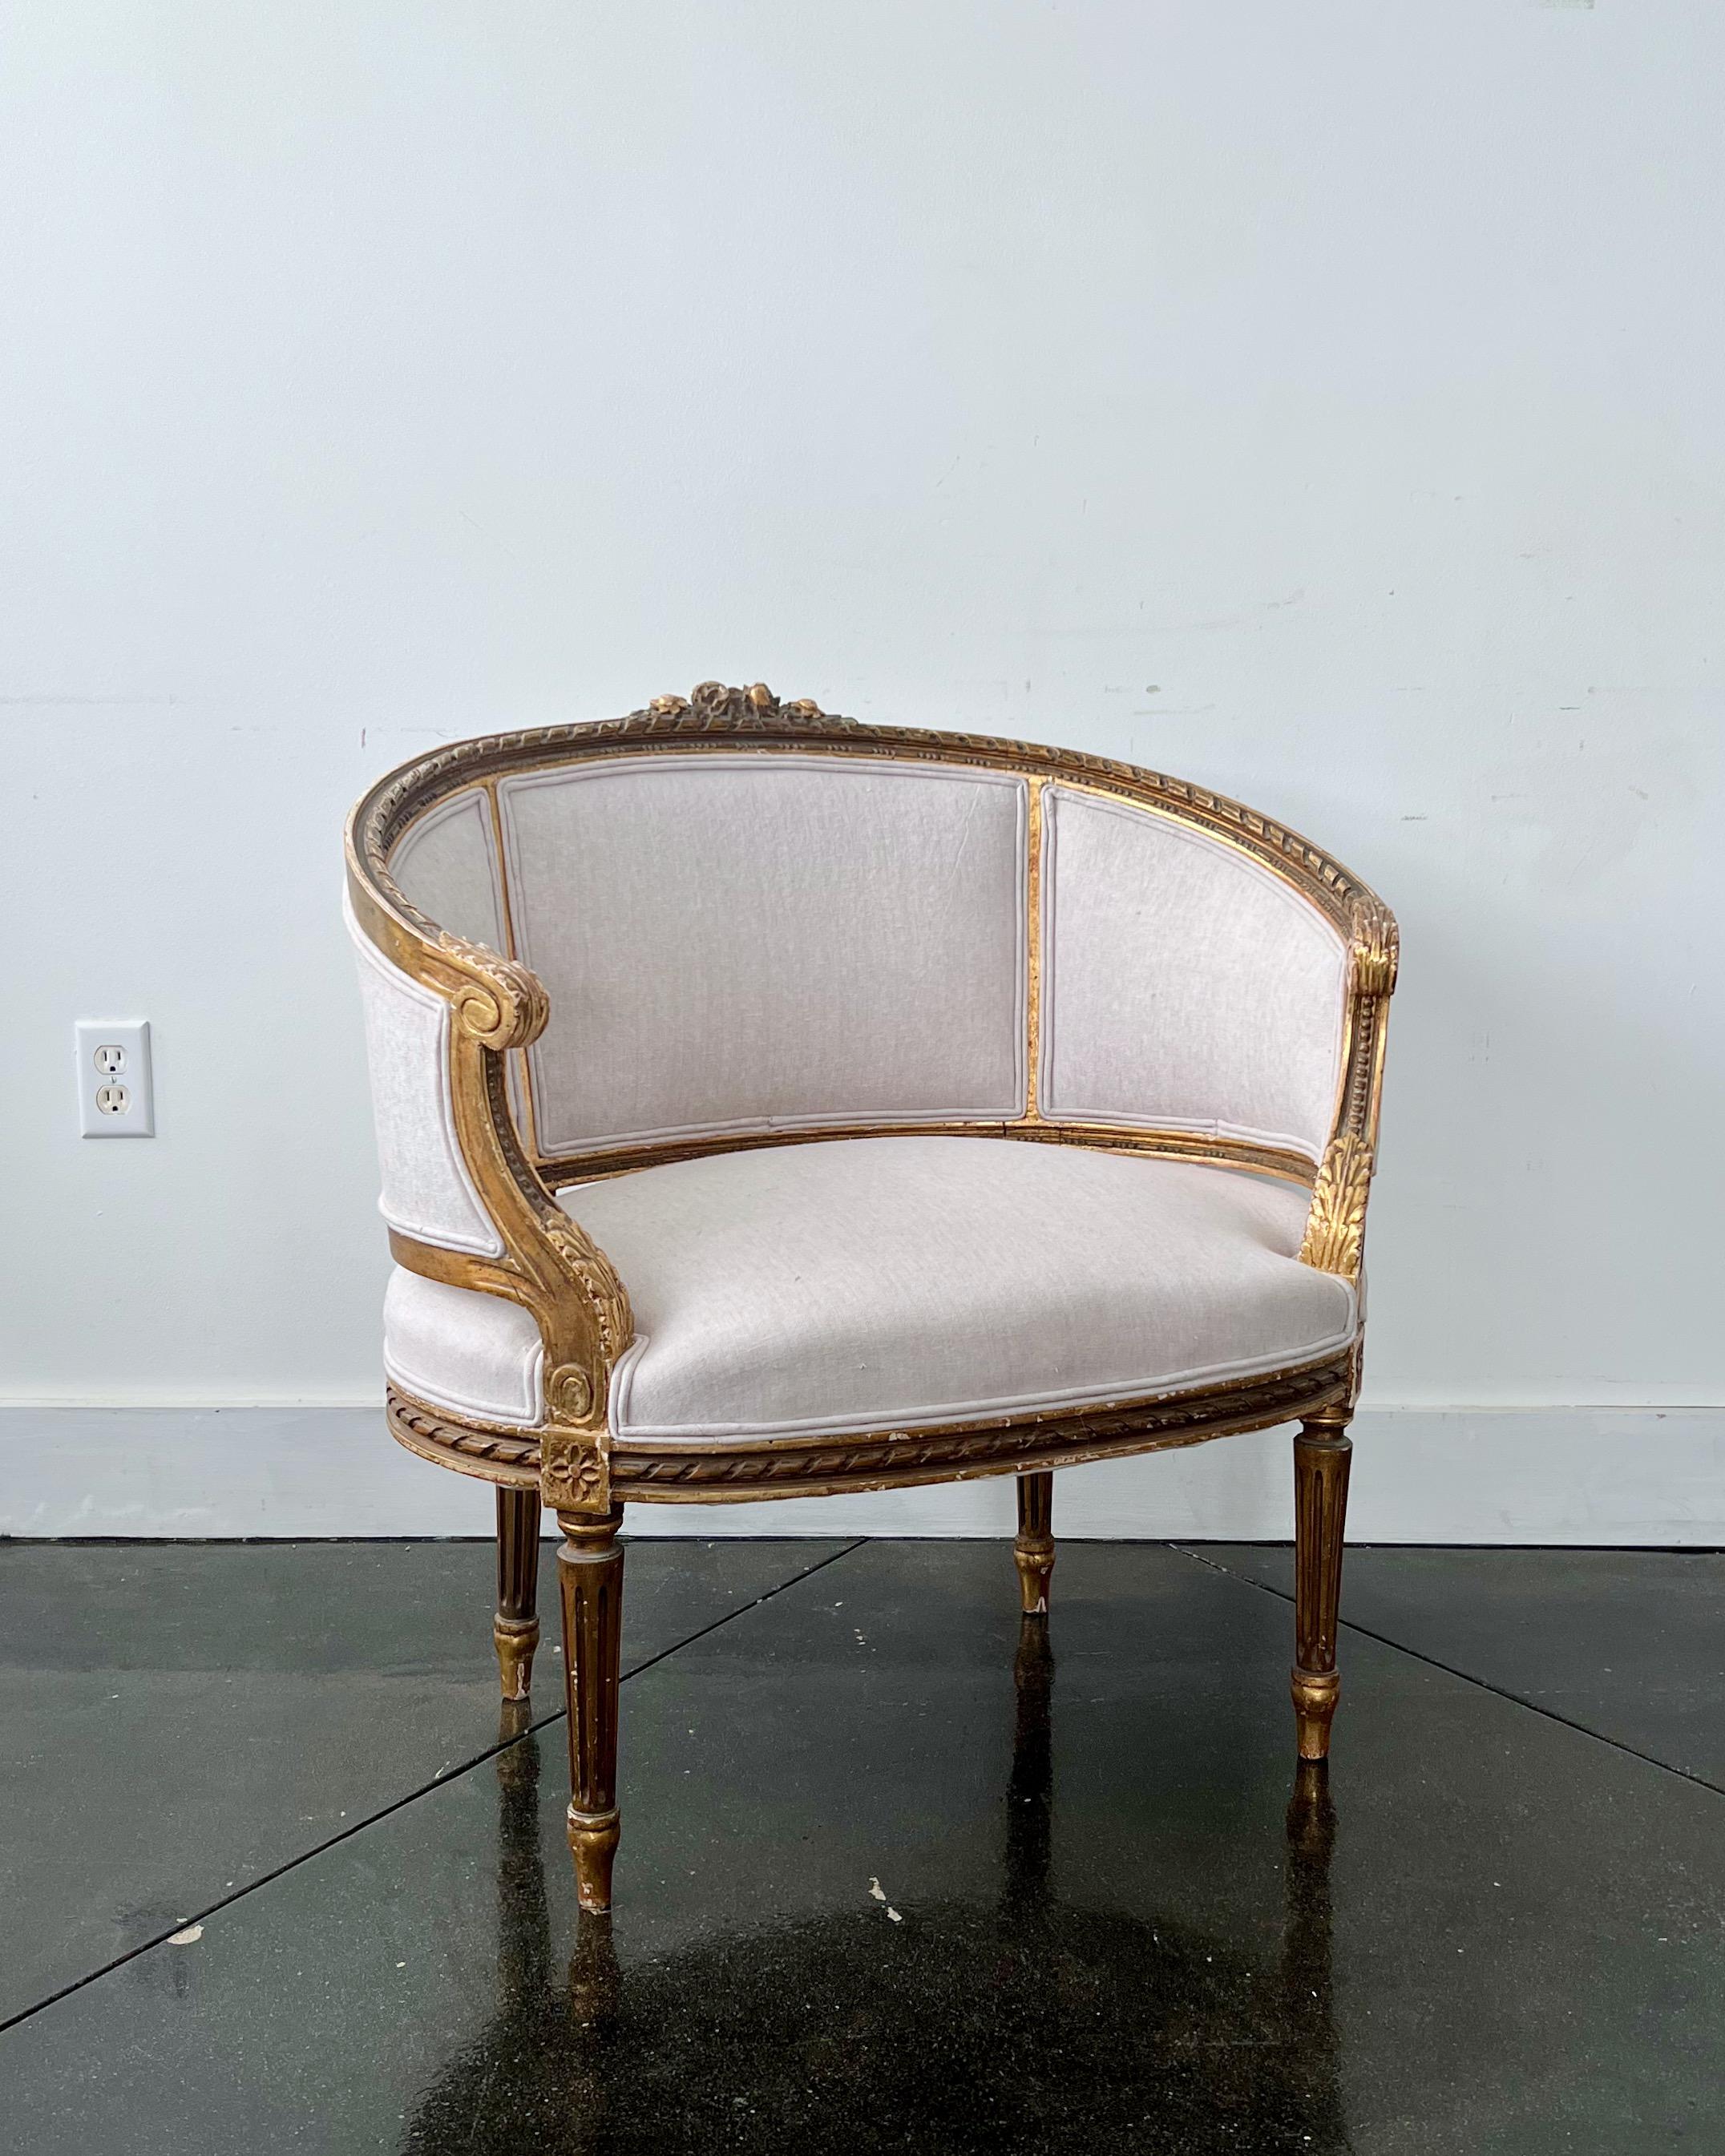 Hand-Carved 19th Century Louis XVI Style Giltwood French Marquise Chair